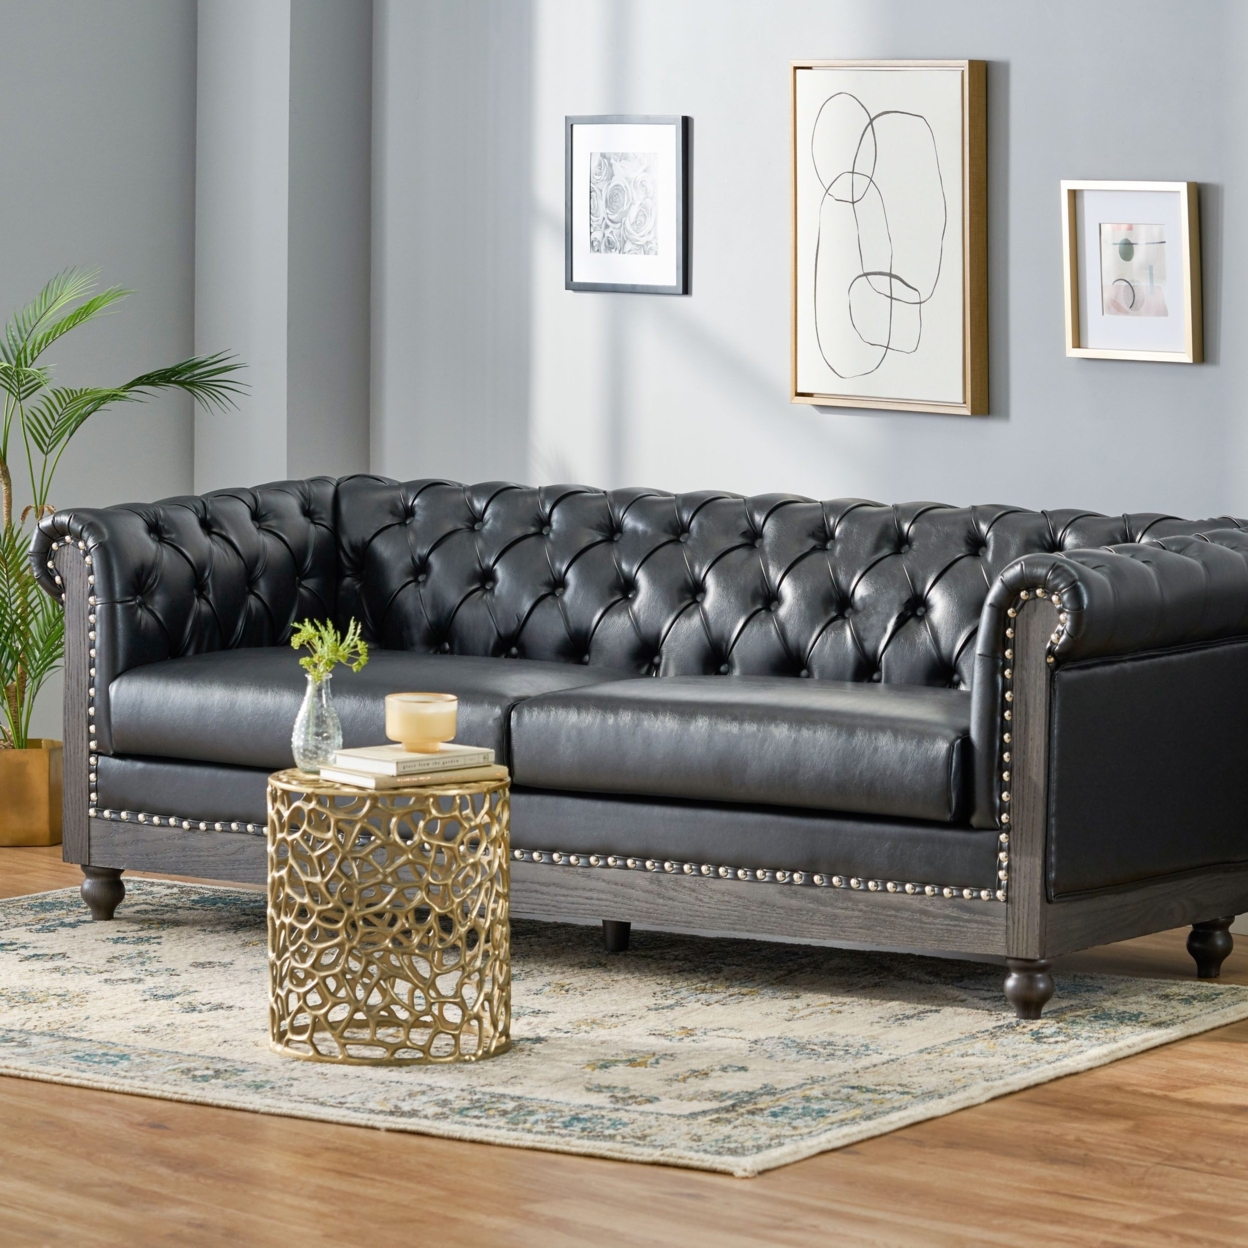 Kinzie Chesterfield Tufted 3 Seater Sofa With Nailhead Trim - Cognac